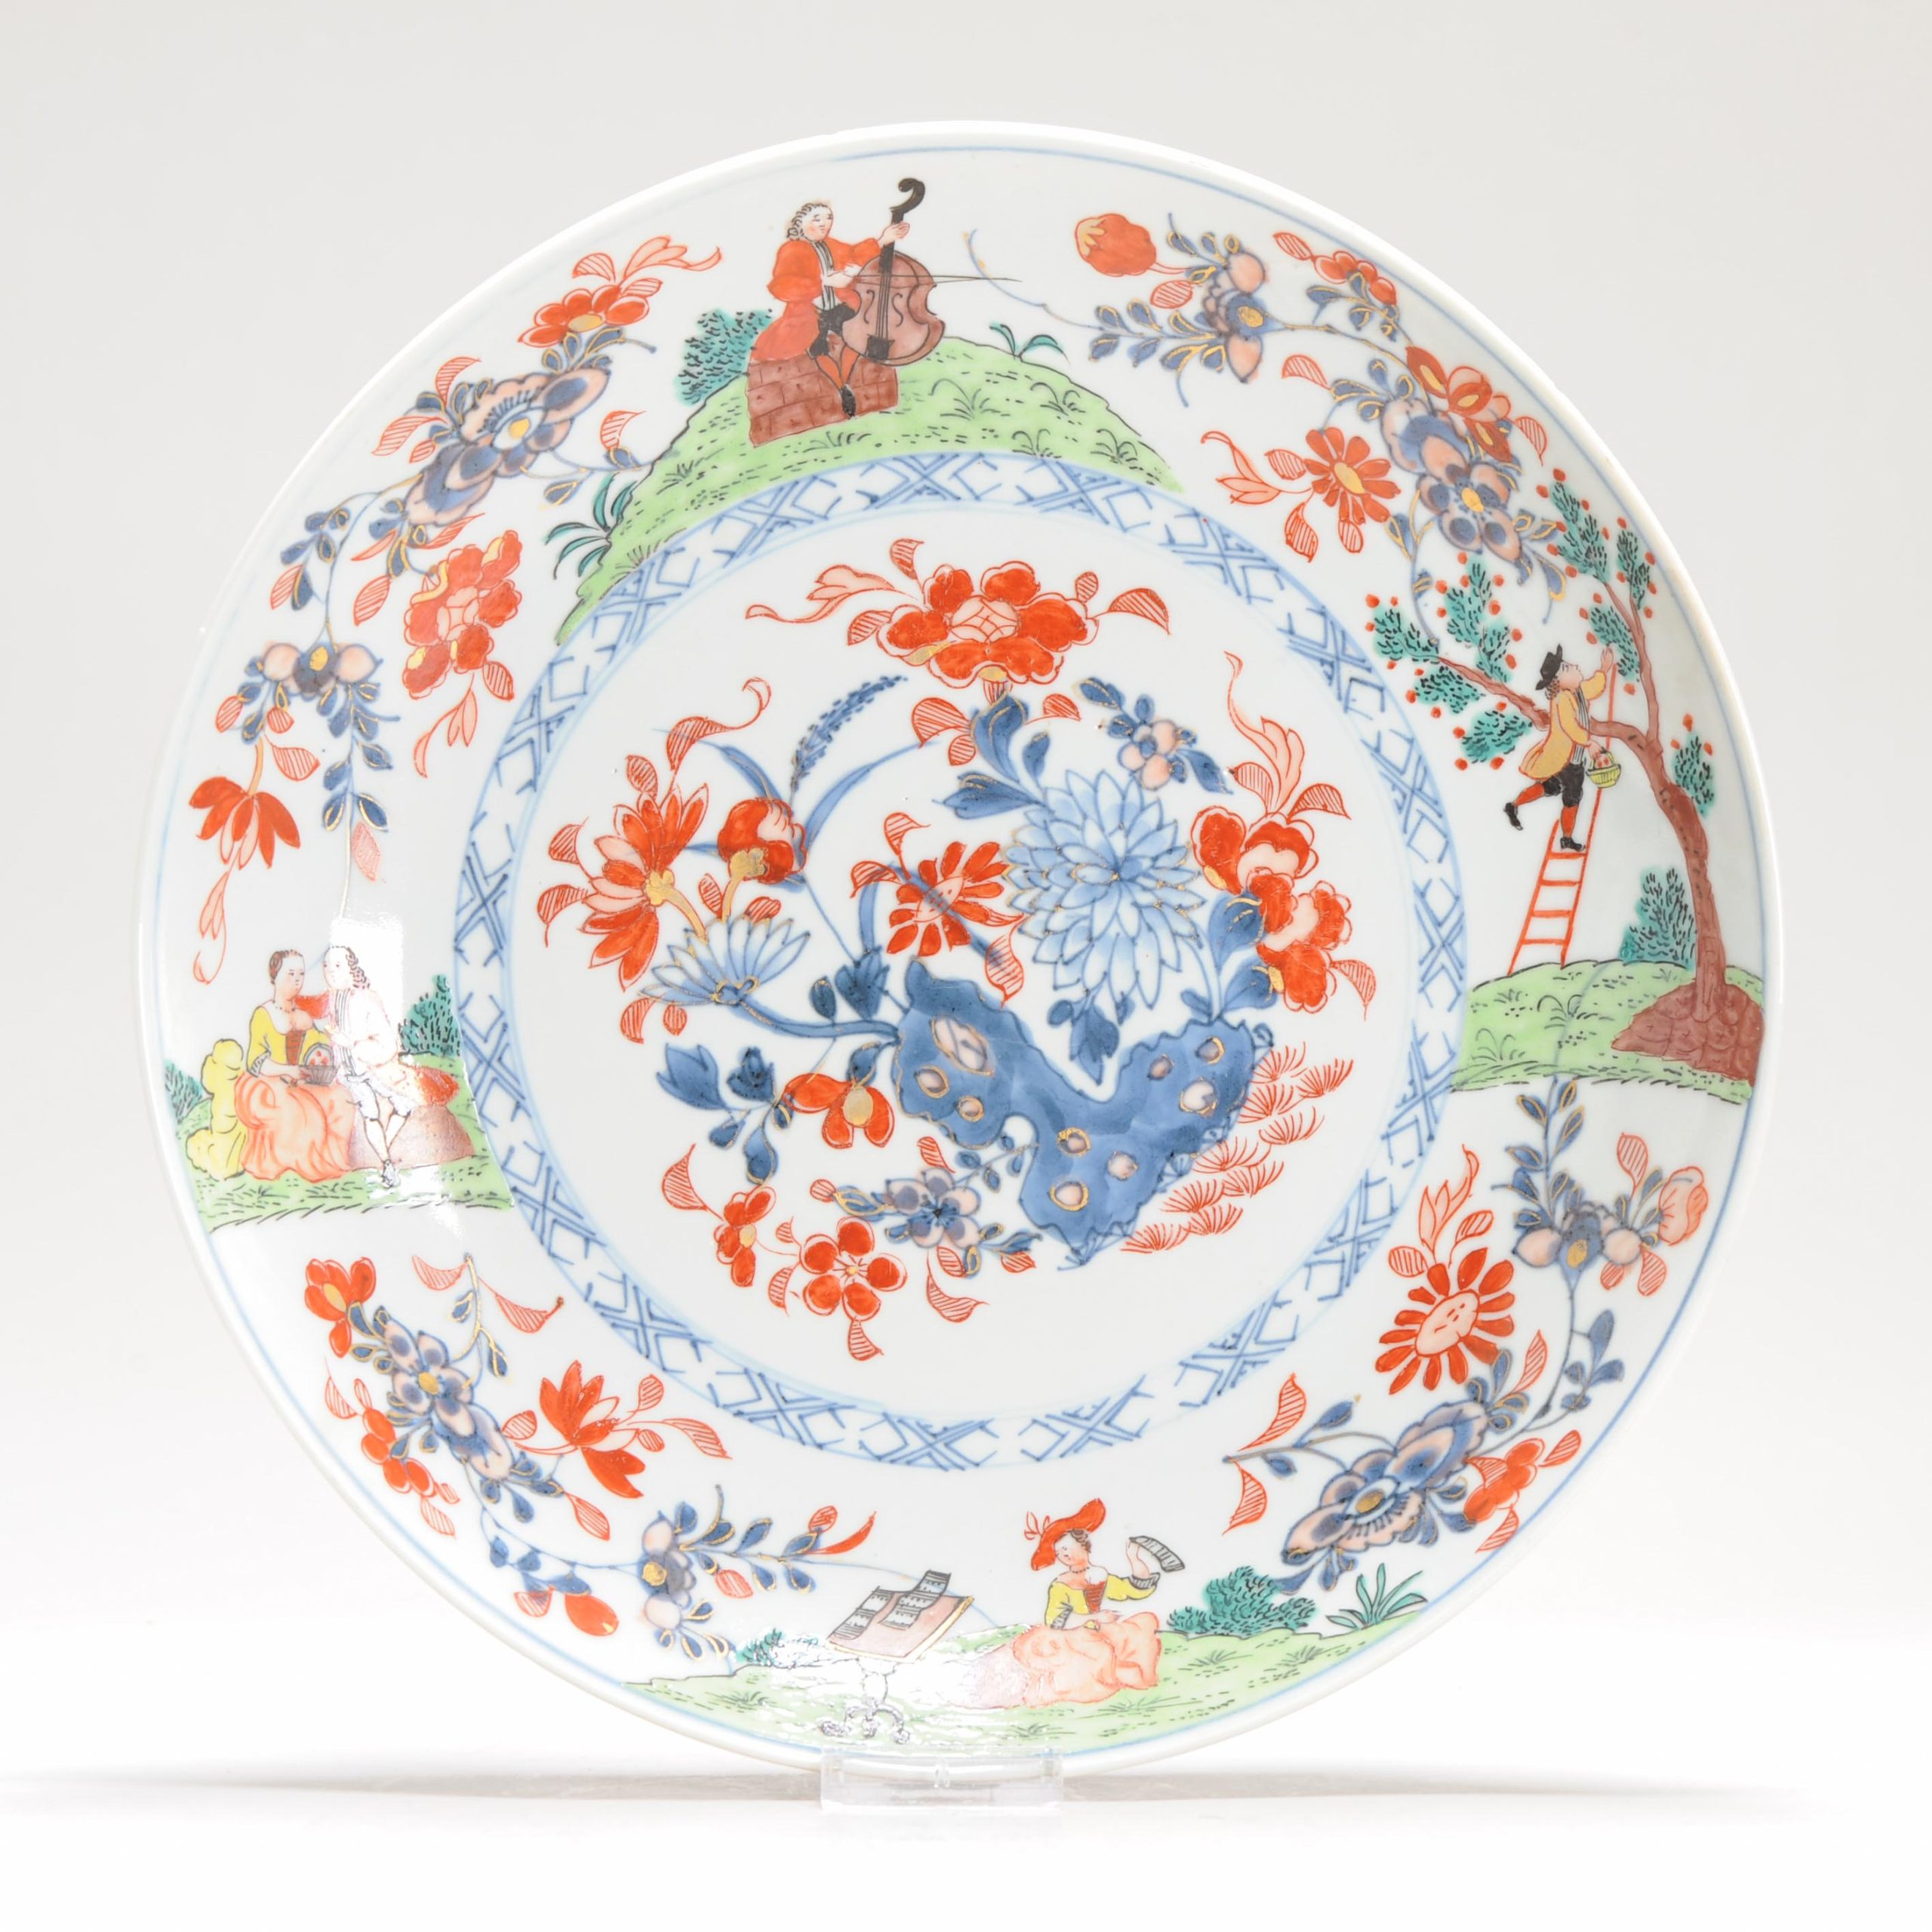 1253 Lovely Yongzheng Qianlong Amsterdam Bont Plate with a Music Party Scene